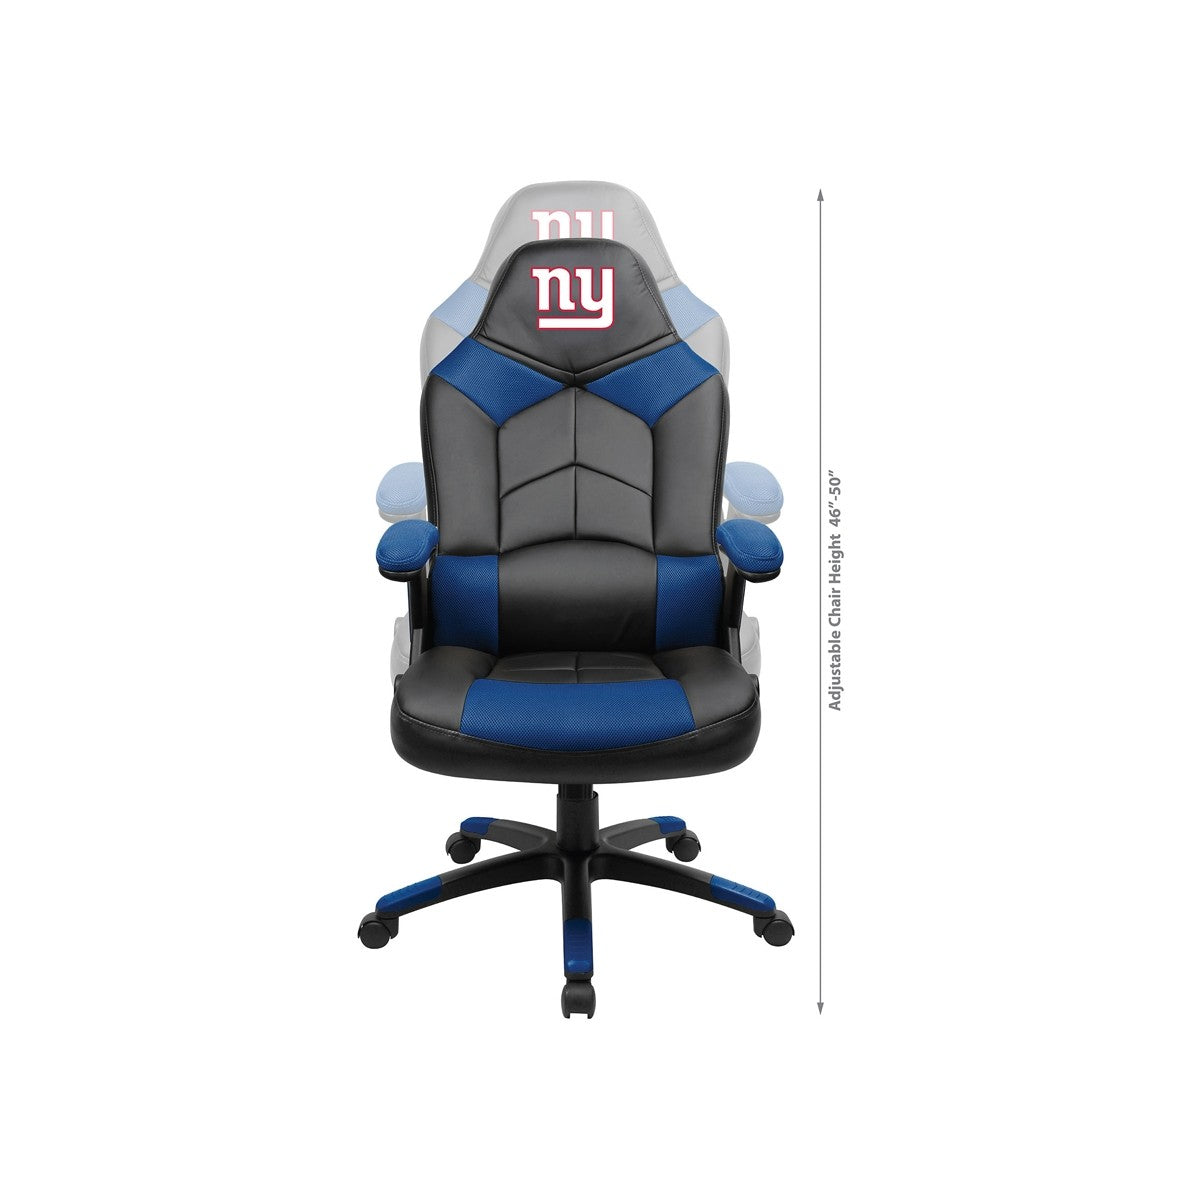 Imperial New York Giants Oversized Gaming Chair